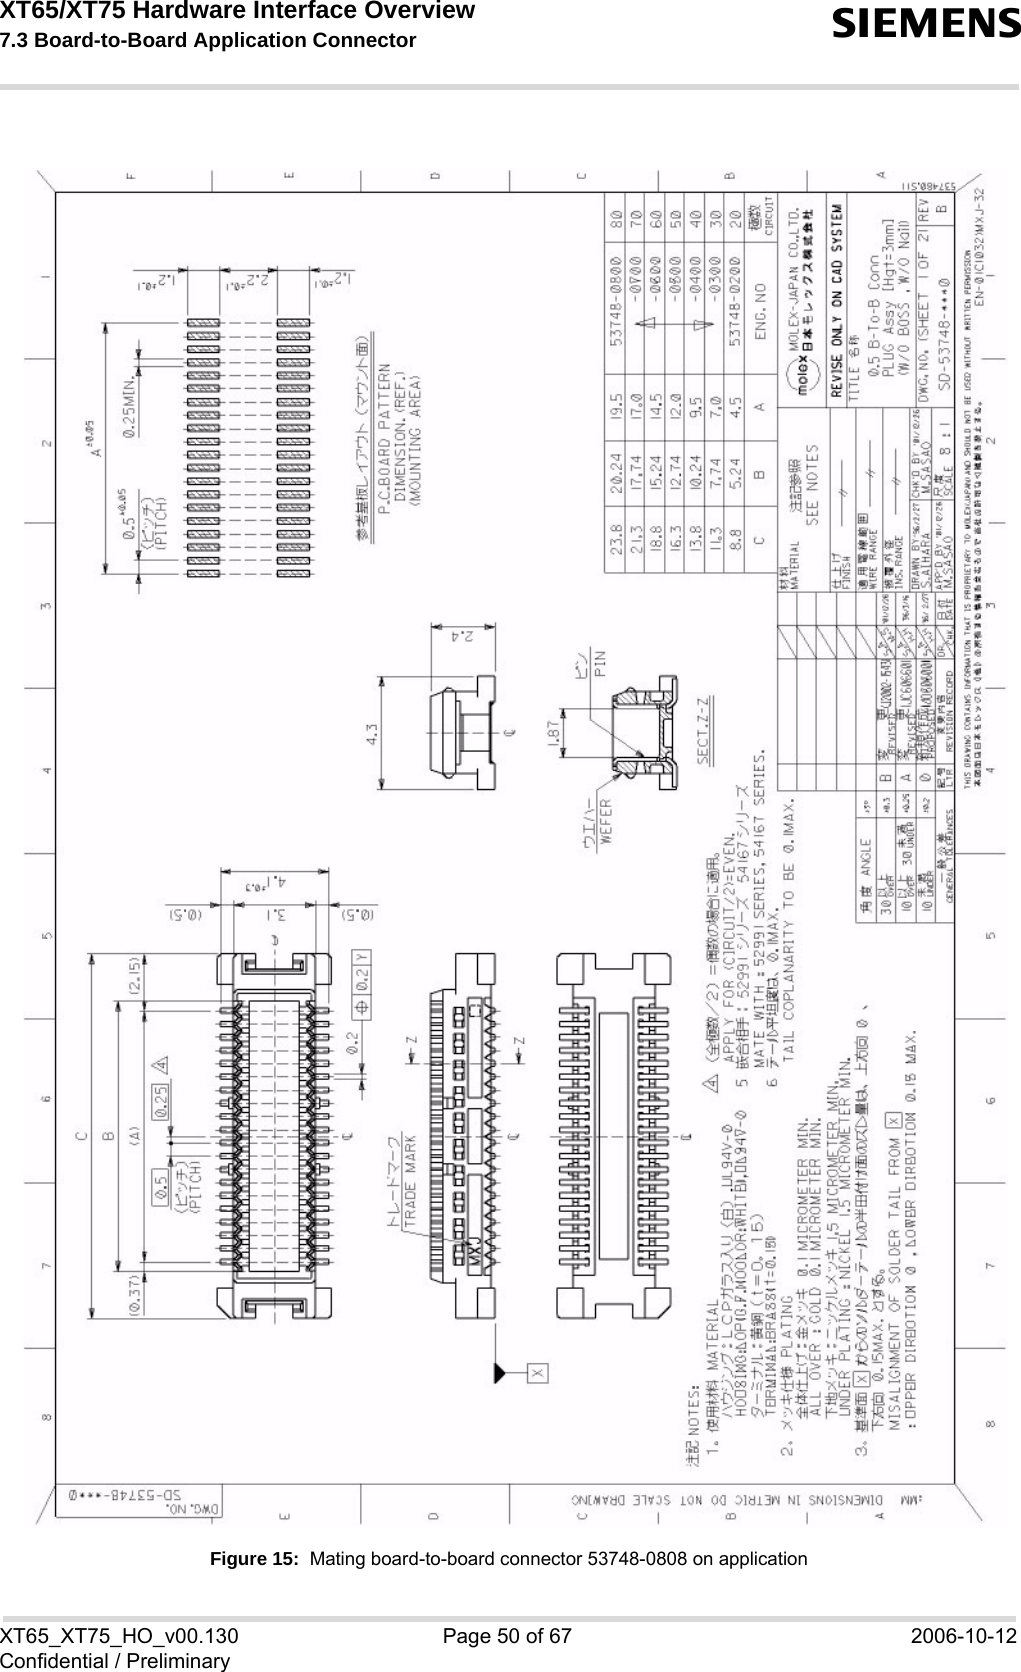 XT65/XT75 Hardware Interface Overview 7.3 Board-to-Board Application Connector sXT65_XT75_HO_v00.130 Page 50 of 67 2006-10-12Confidential / PreliminaryFigure 15:  Mating board-to-board connector 53748-0808 on application